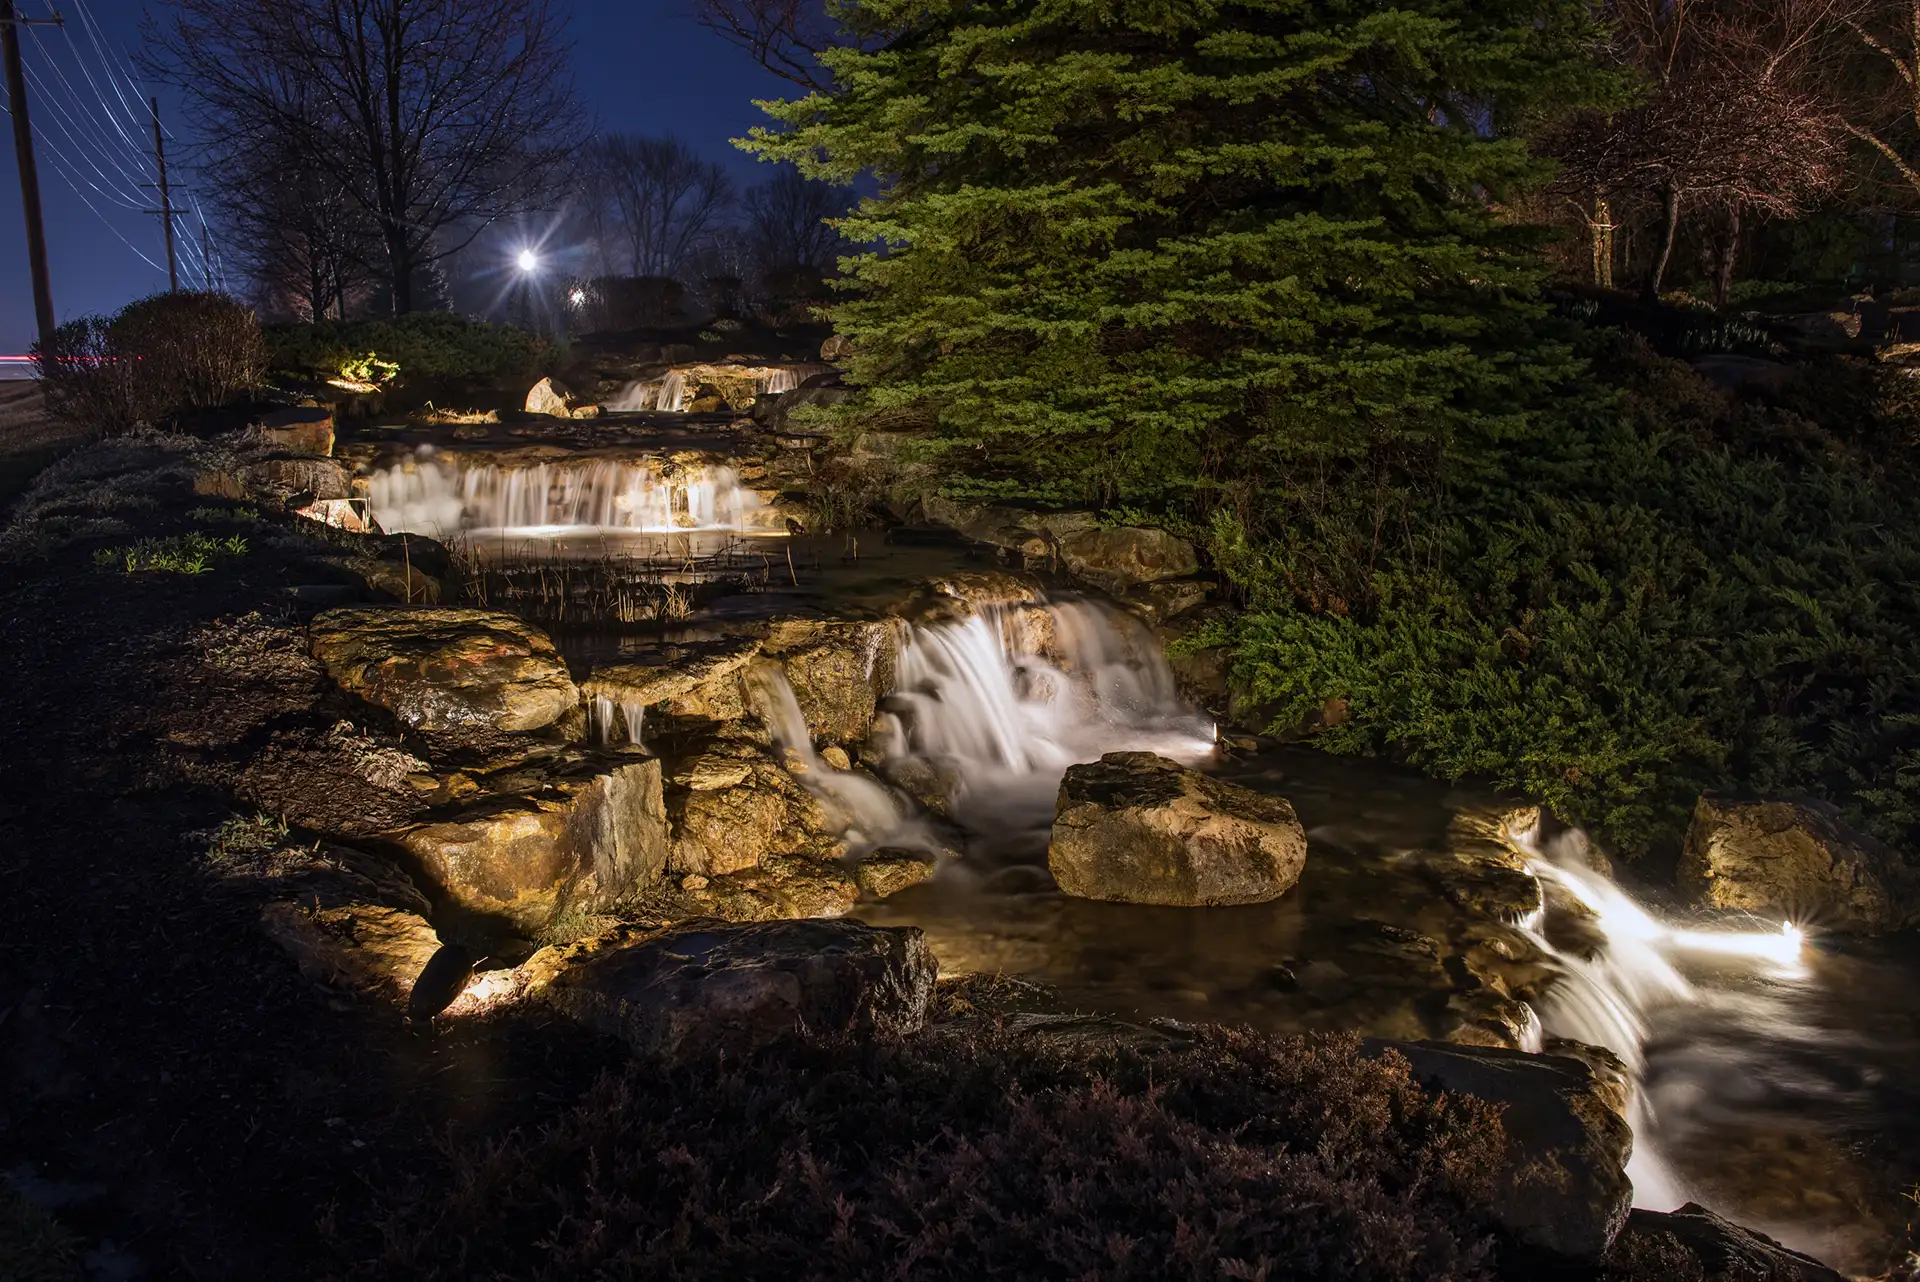 Spyglass Falls image 7 waterfall at night flowing water Lighthouse Design Studio Fishers IN